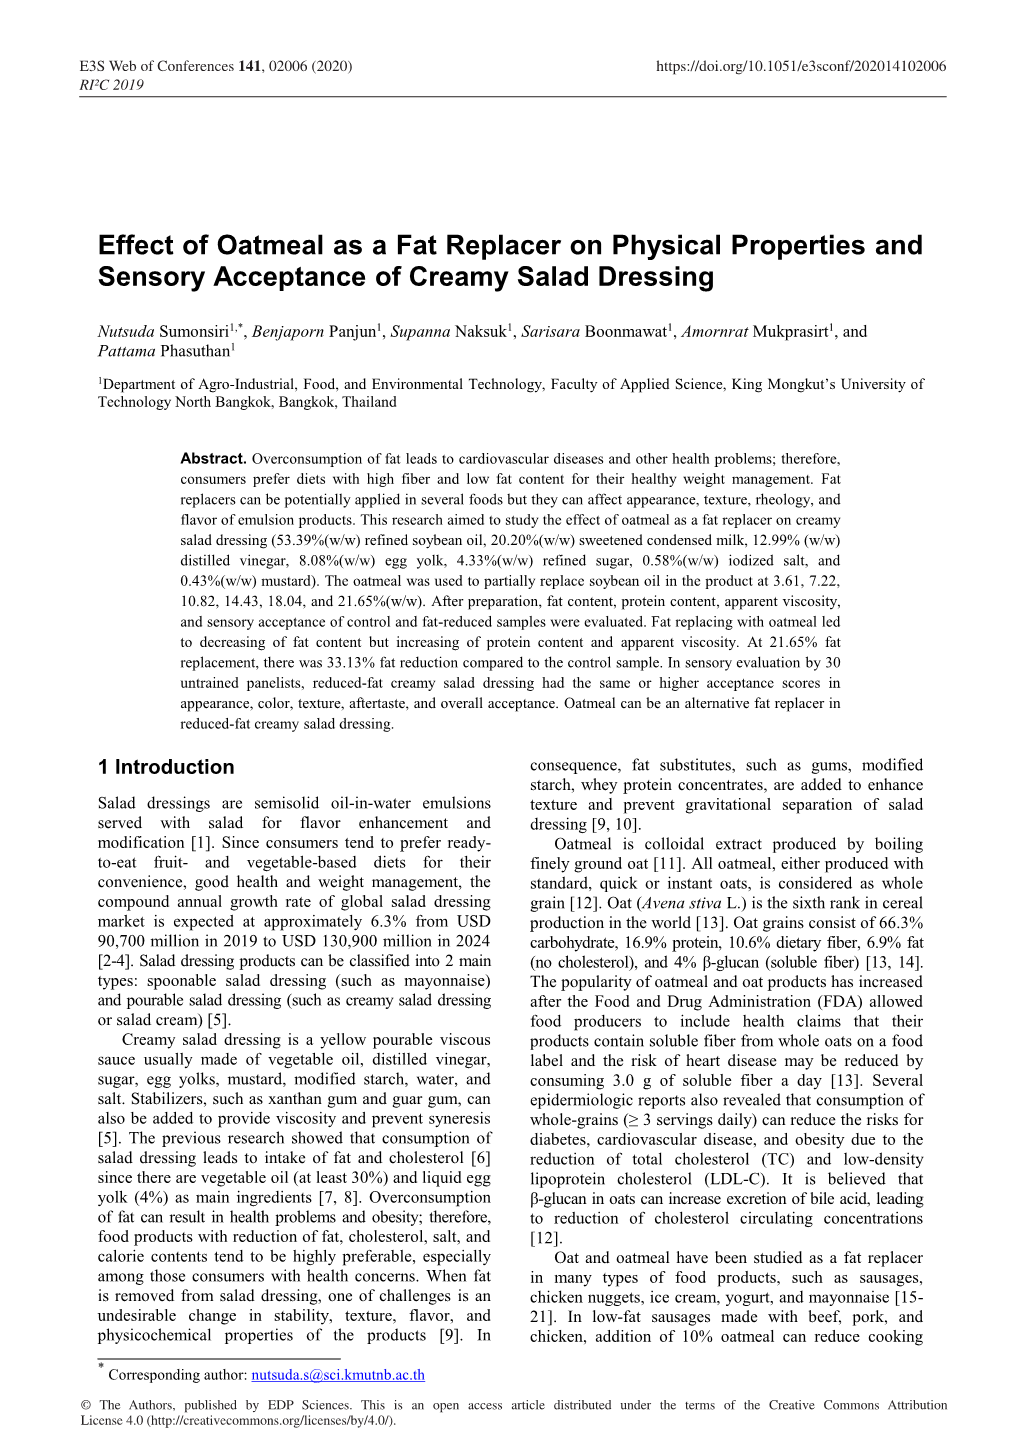 Effect of Oatmeal As a Fat Replacer on Physical Properties and Sensory Acceptance of Creamy Salad Dressing